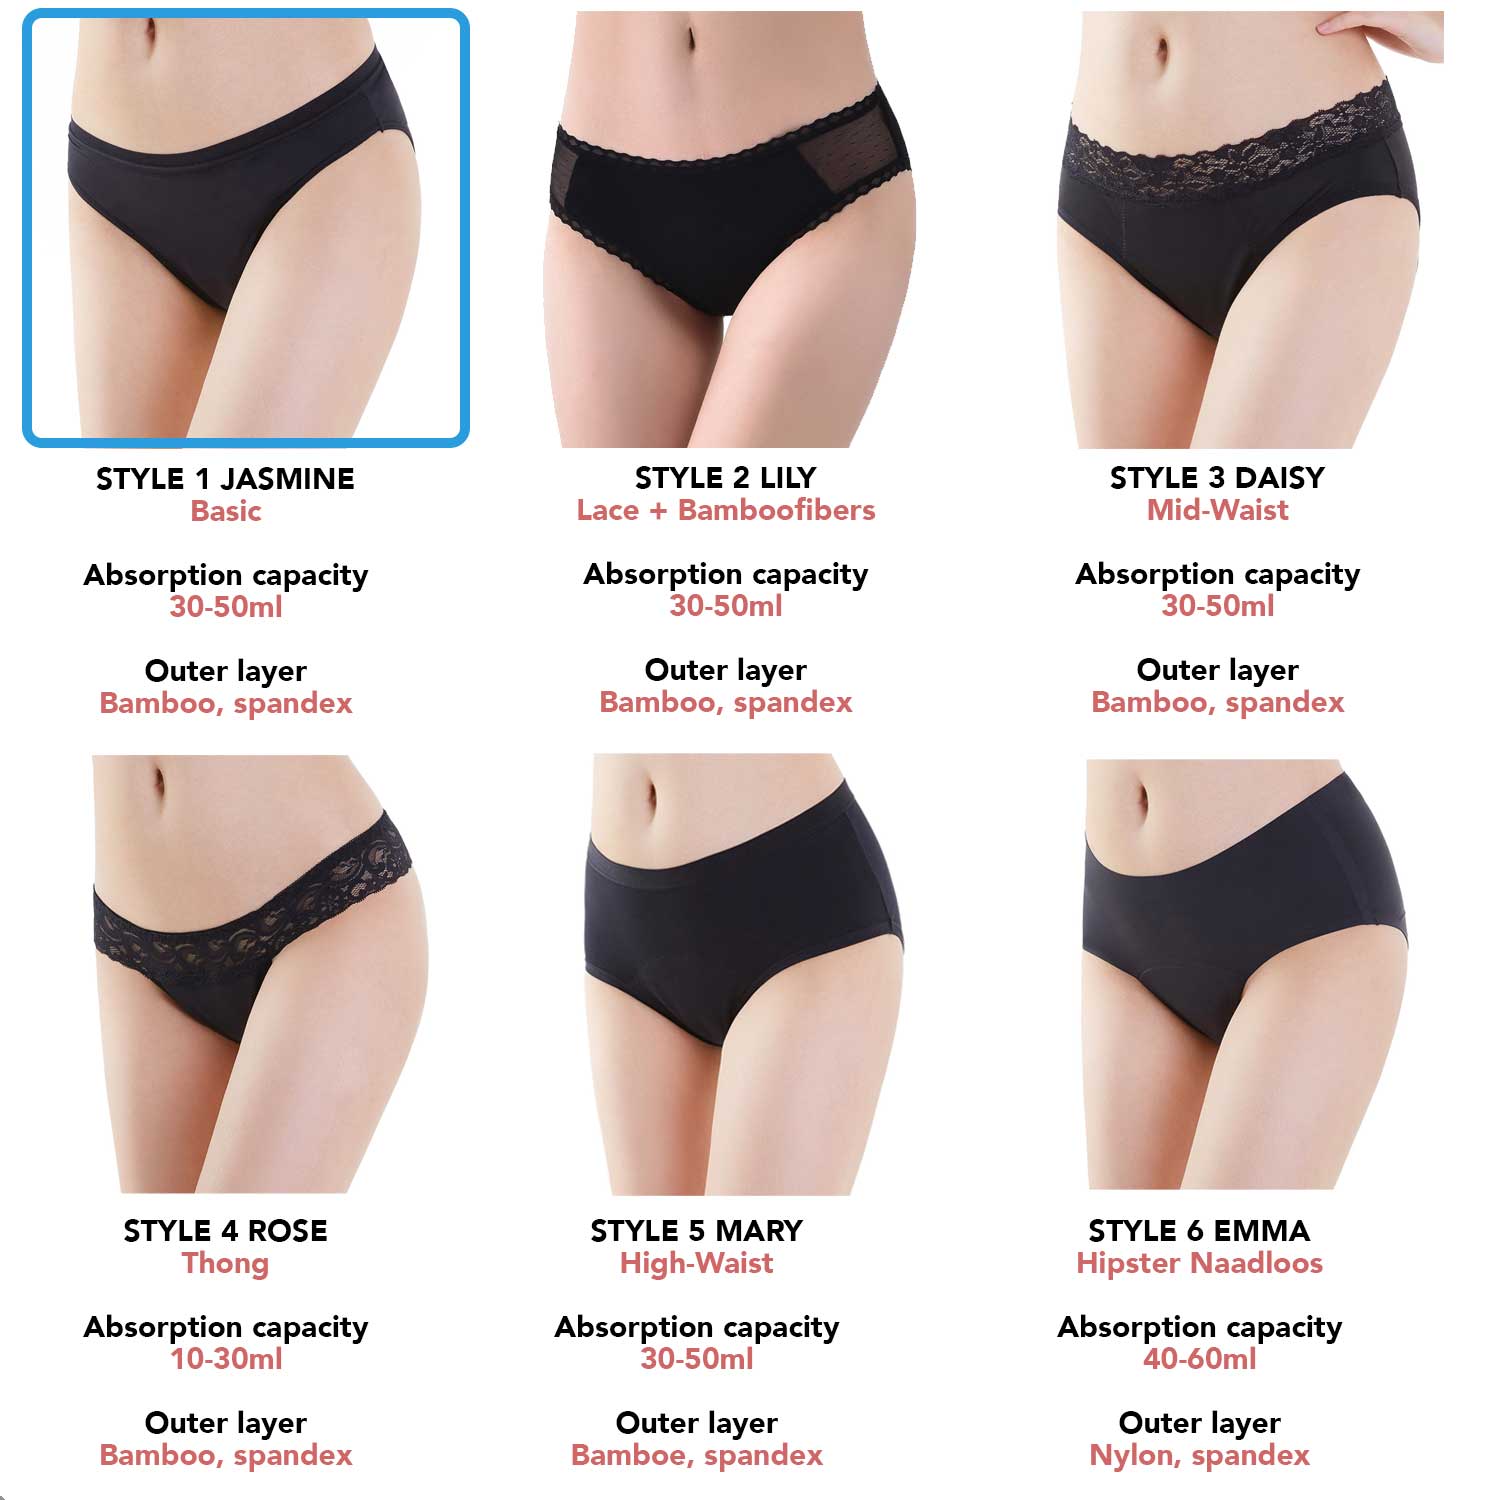 5 Types of Panty Styles For Women